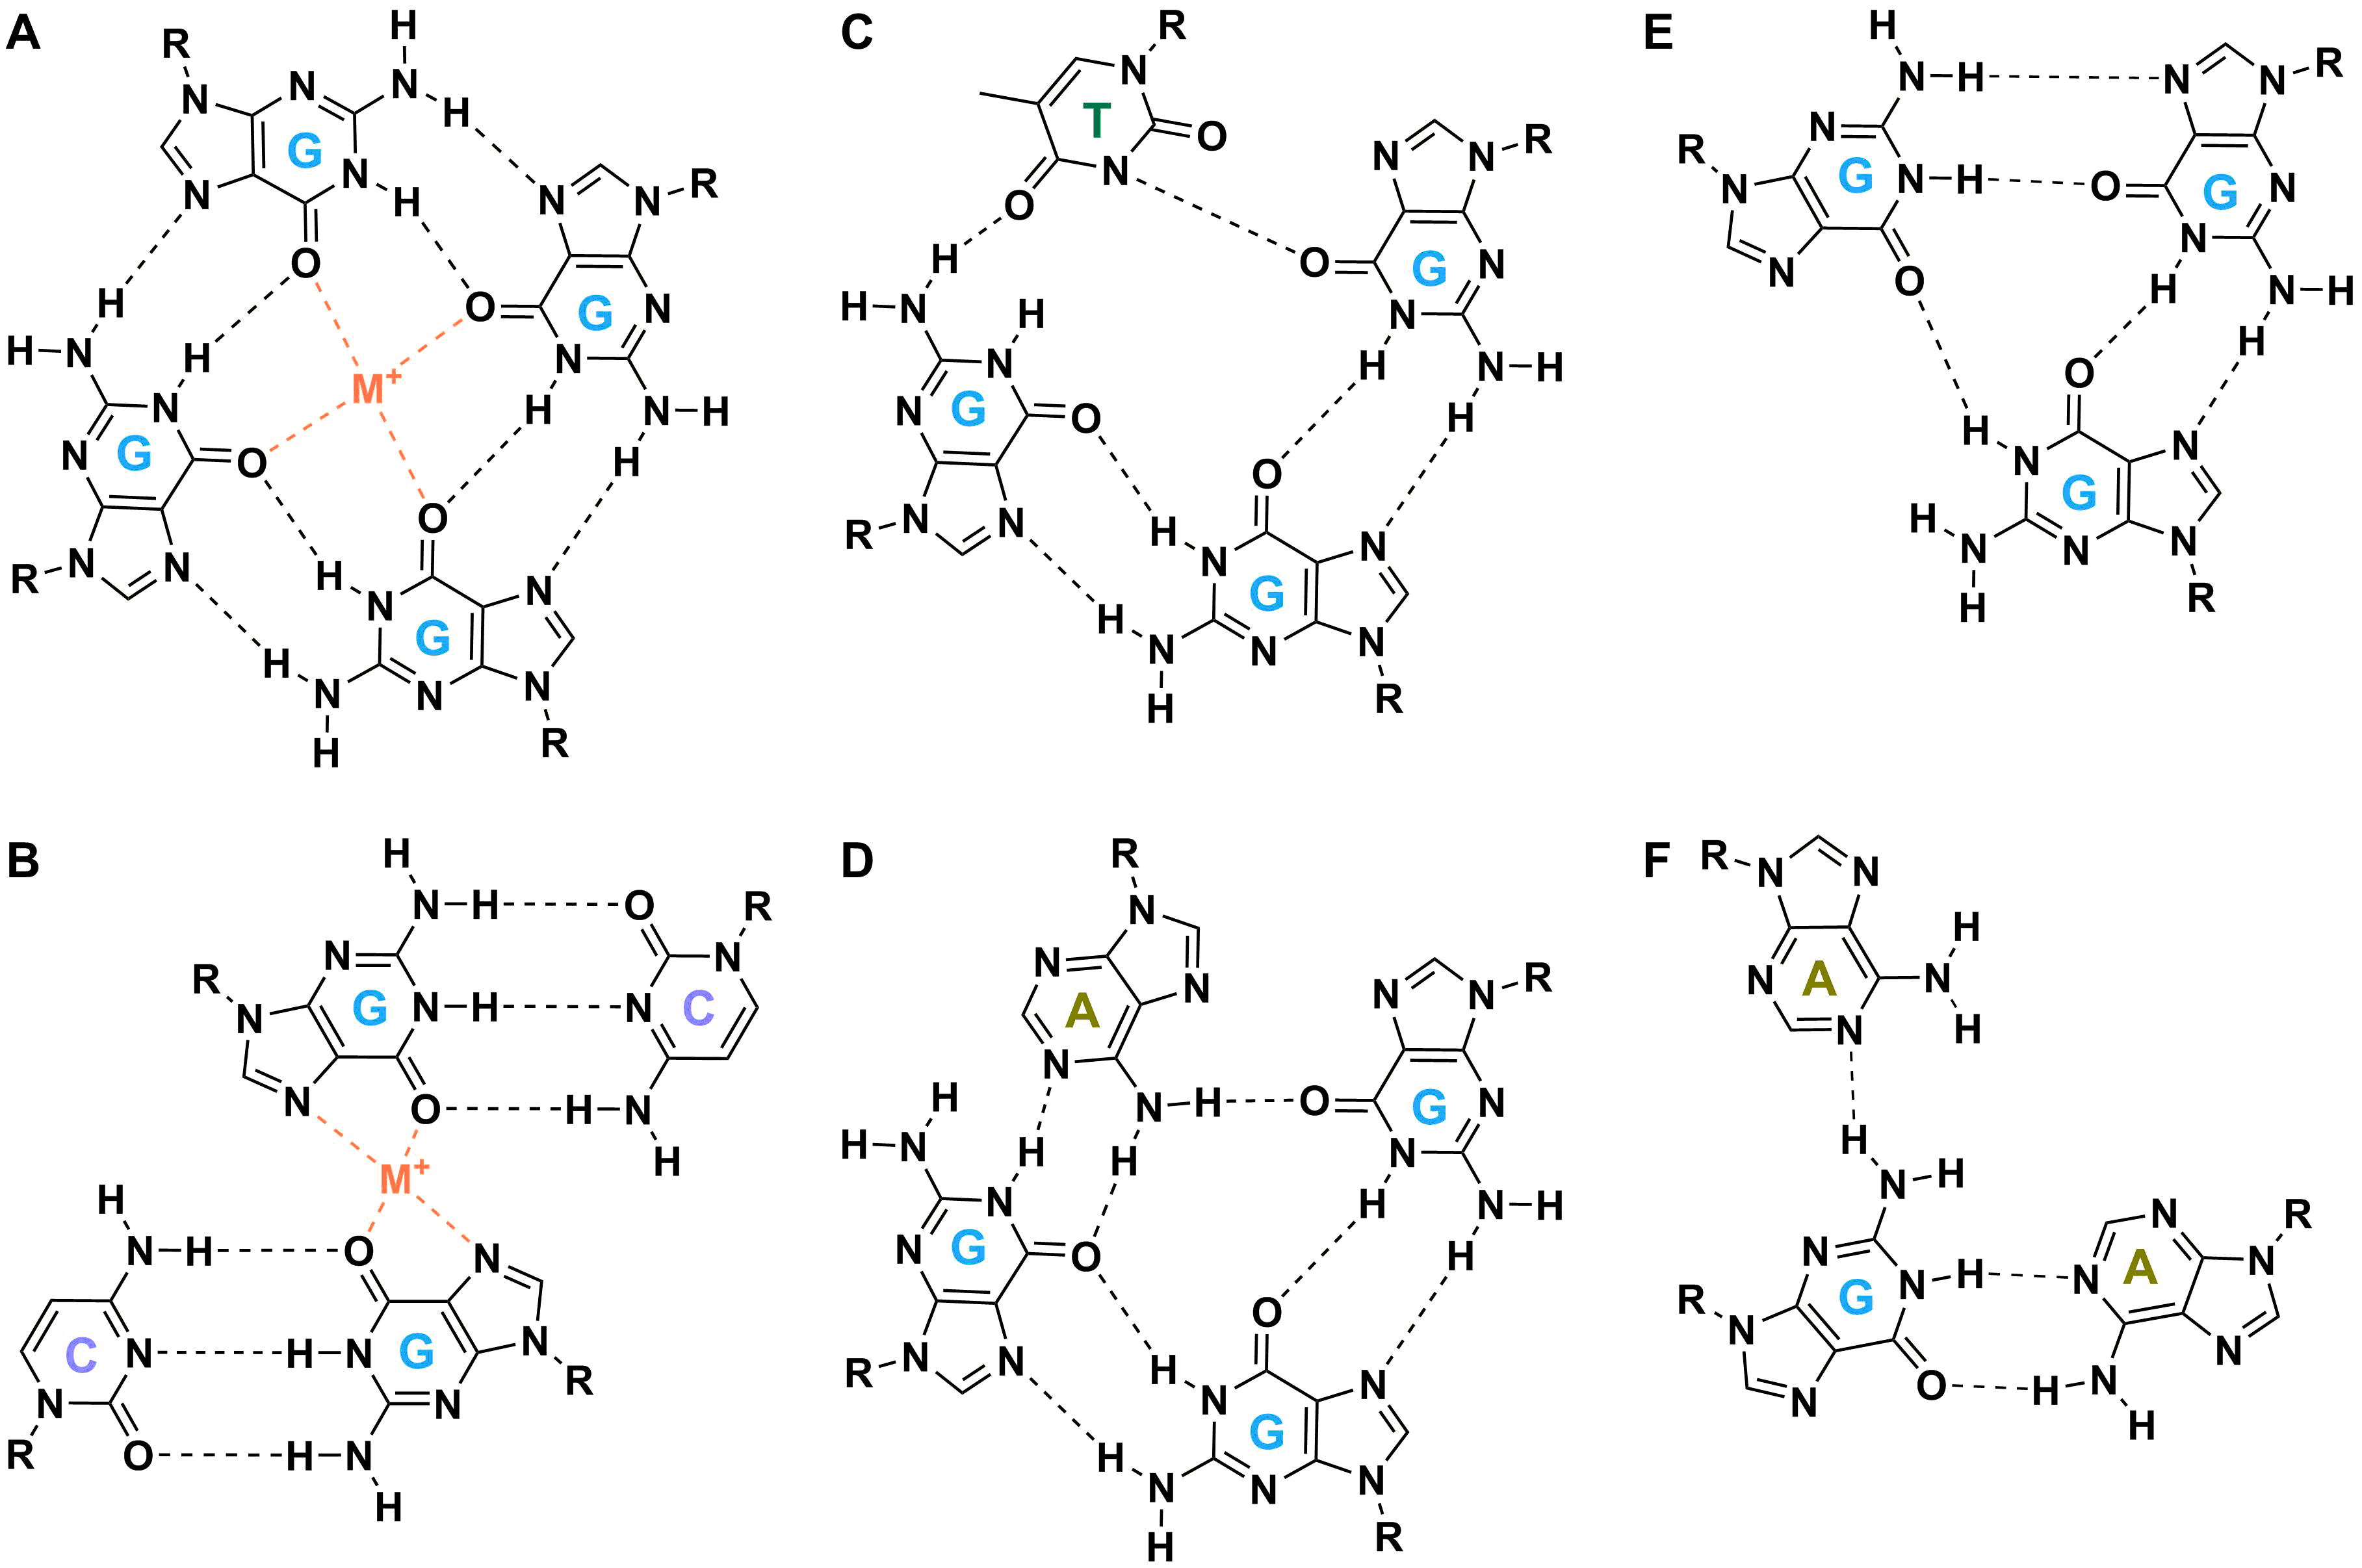 Chemical structures of the G-quartet (A), G·C·G·C (B [@lim2009]), G·G·G·T (C [@webbadasilva2003]) and G·G·G·A (D [@webbadasilva2003a]) mixed quartets, G·G·G G-triplet (E [@zhang2009]), and A·G·A mixed triplet (F [@zhang2009]).